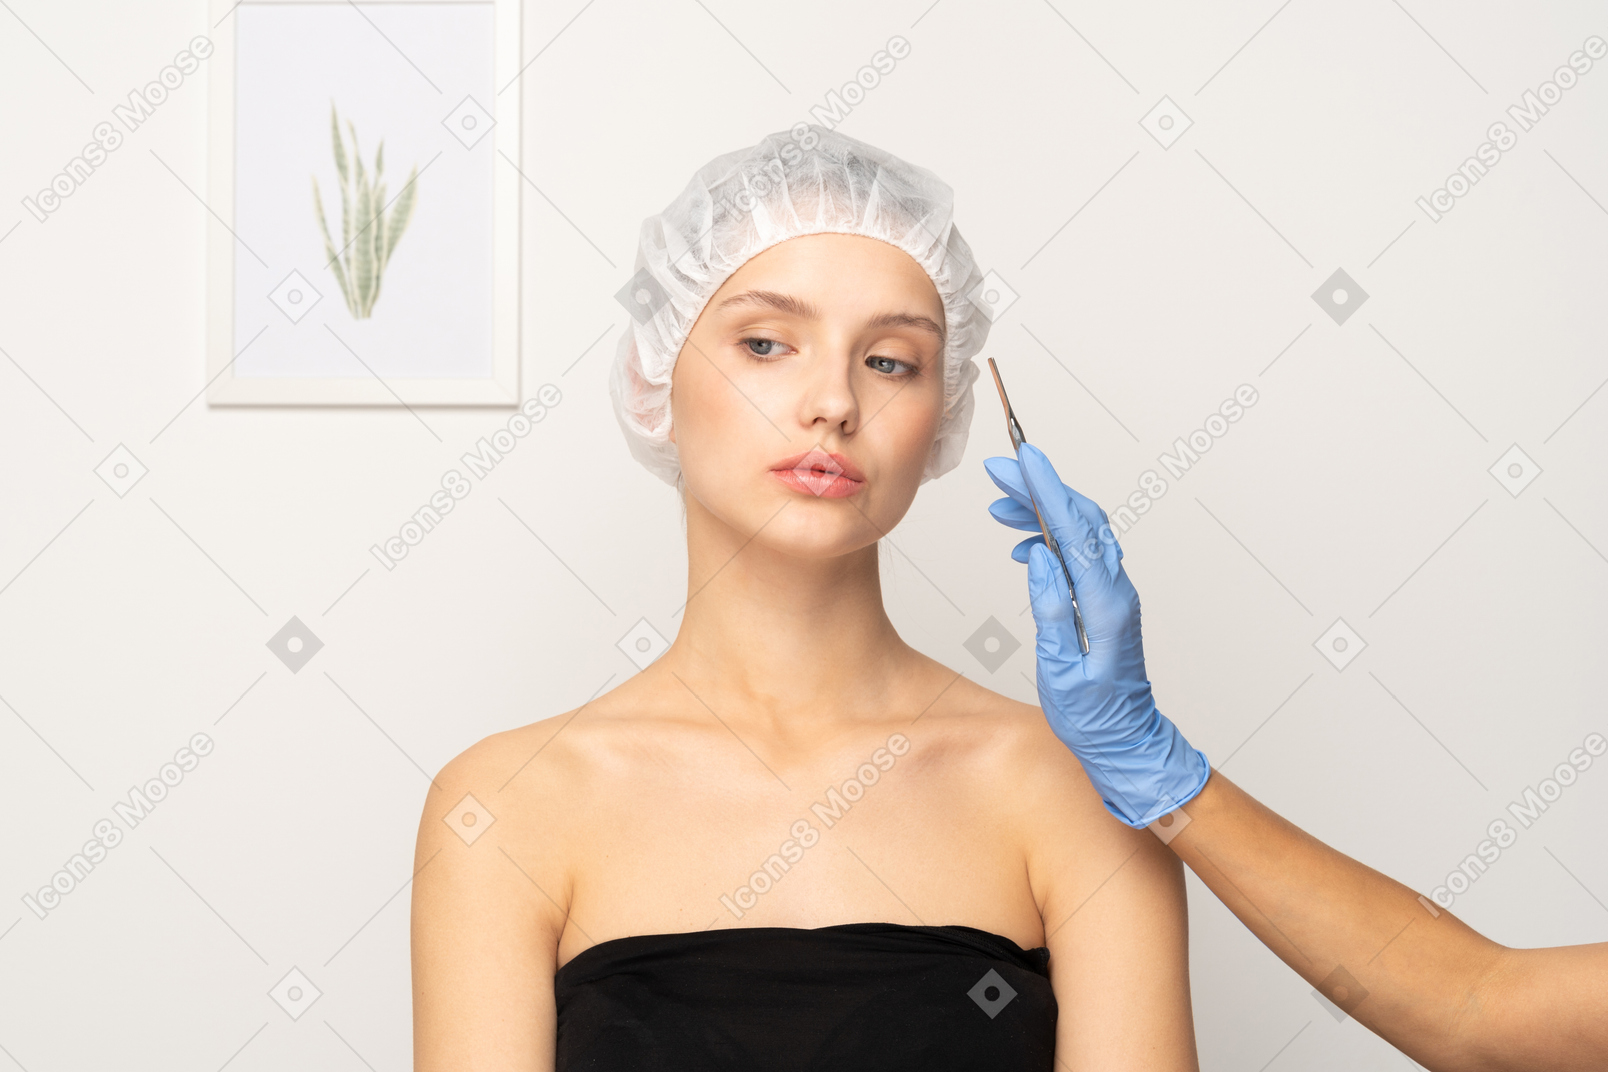 Doctor holding scalpel near female patient's face